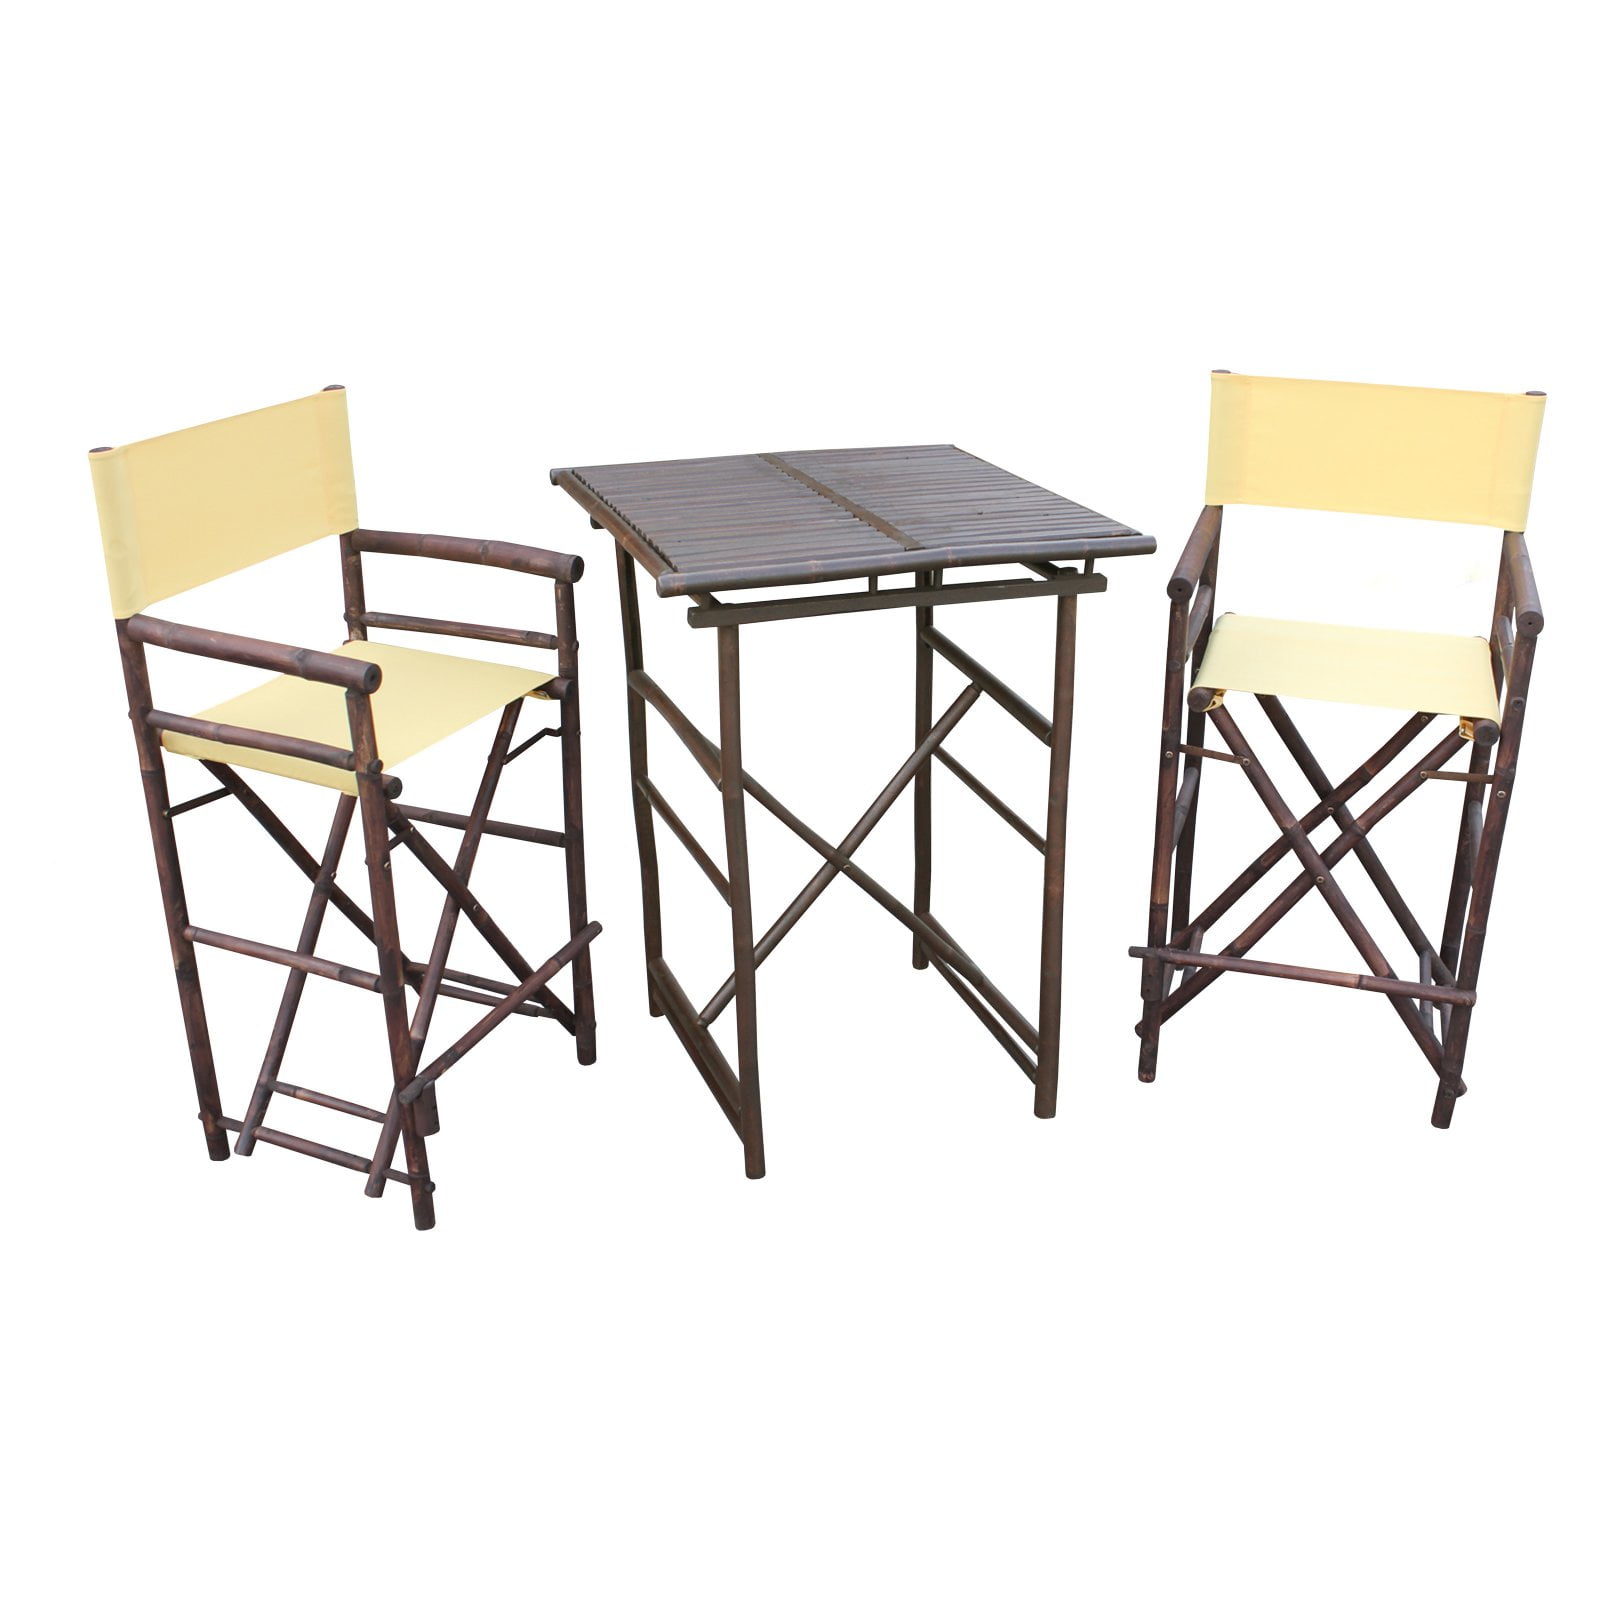 Statra Height Table and Chairs Set Outdoor Patio Bistro Dining Pub Bar Bamboo 3-Piece Aqua Blue 